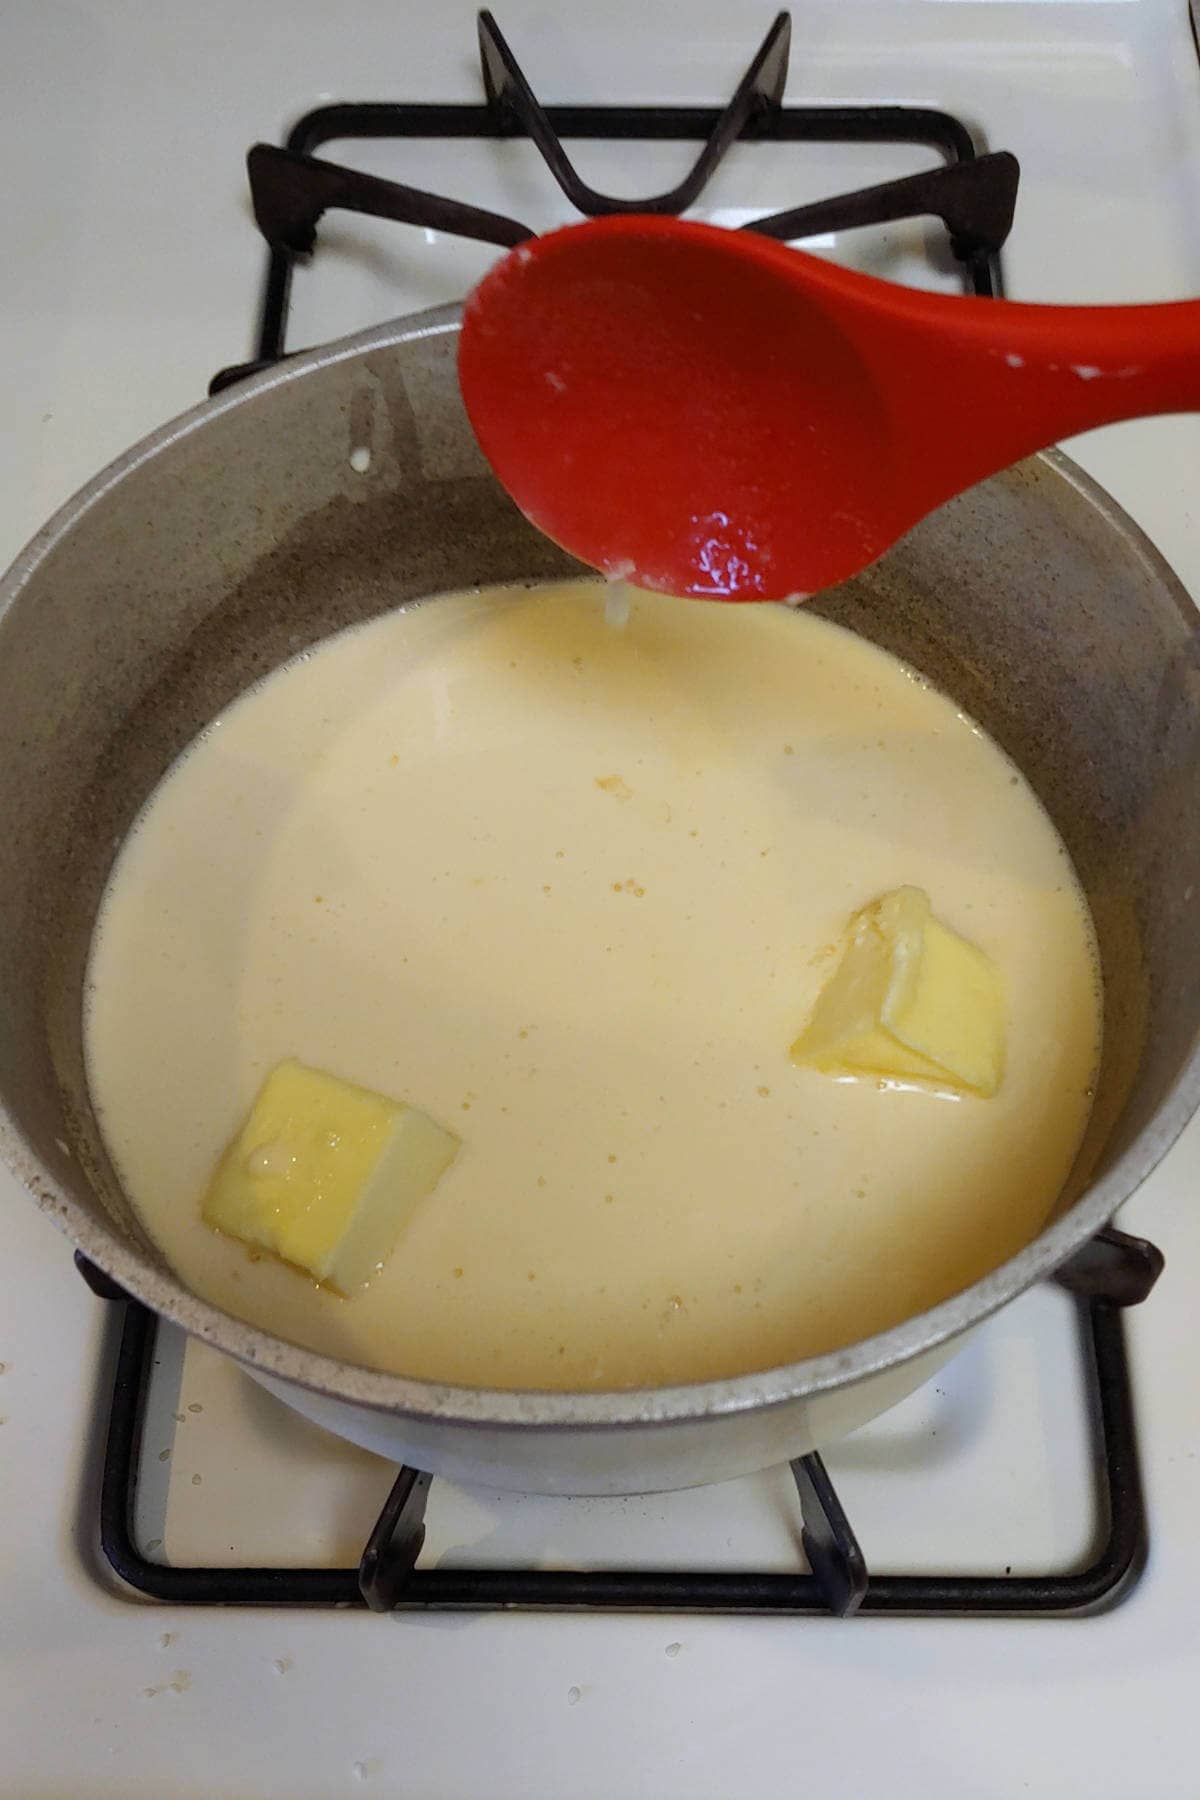 butter, milk, and sugar in a pot on the stove